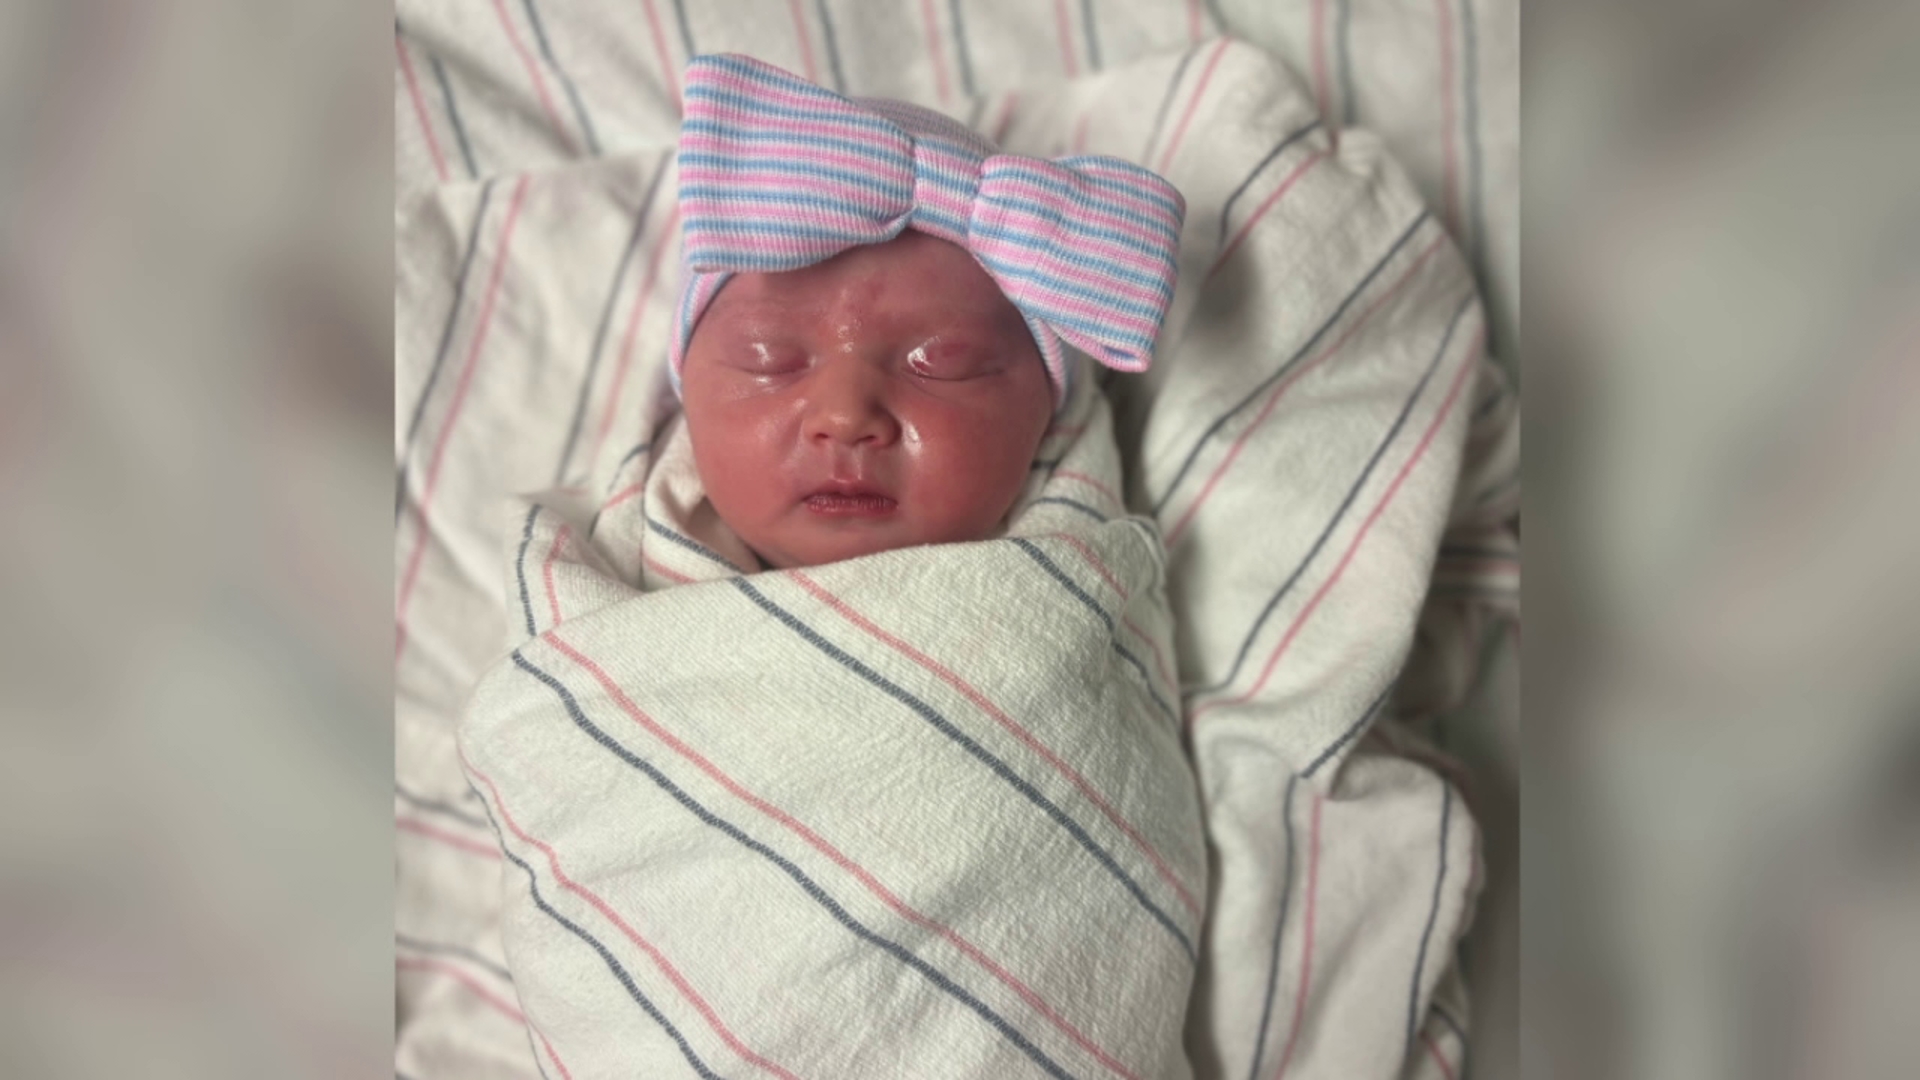 Newswatch 16's very own Stacy Lange and her husband Jake welcomed a beautiful baby girl Monday morning.